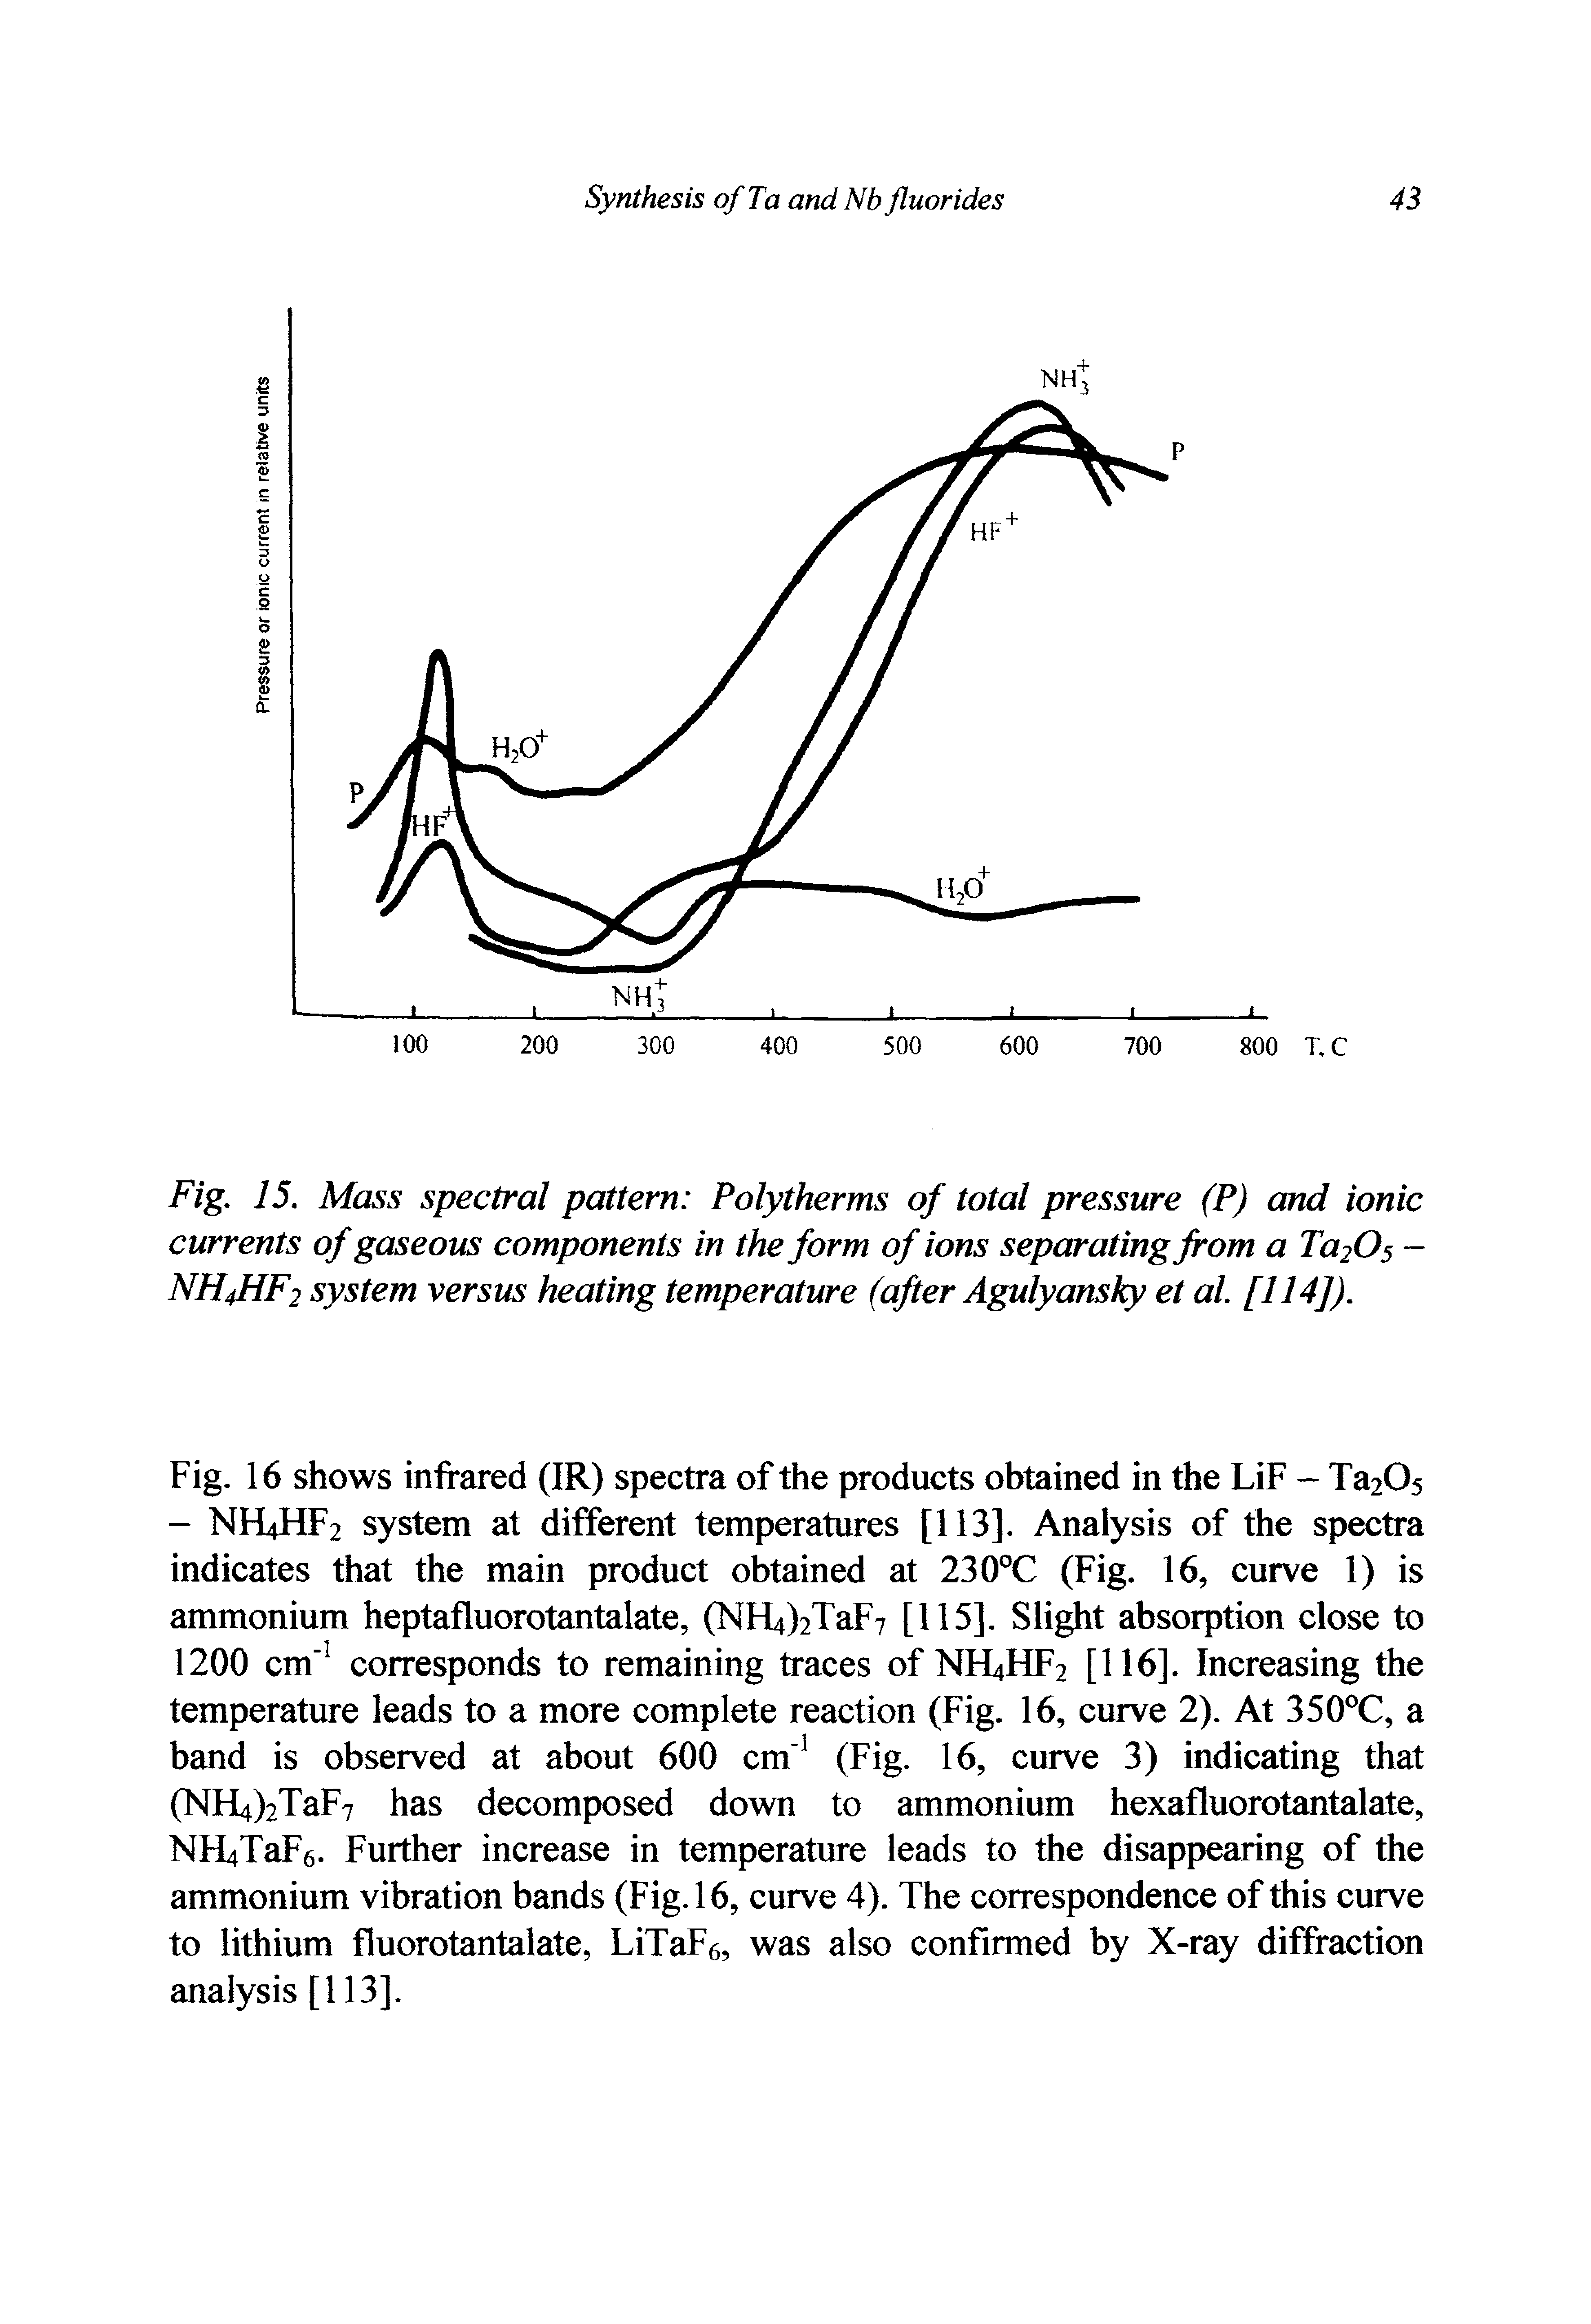 Fig. 15. Mass spectral pattern Polytherms of total pressure (P) and ionic currents of gaseous components in the form of ions separating from a TaiOs -NH4HF2 system versus heating temperature (after Agulyansky et al. [114]).